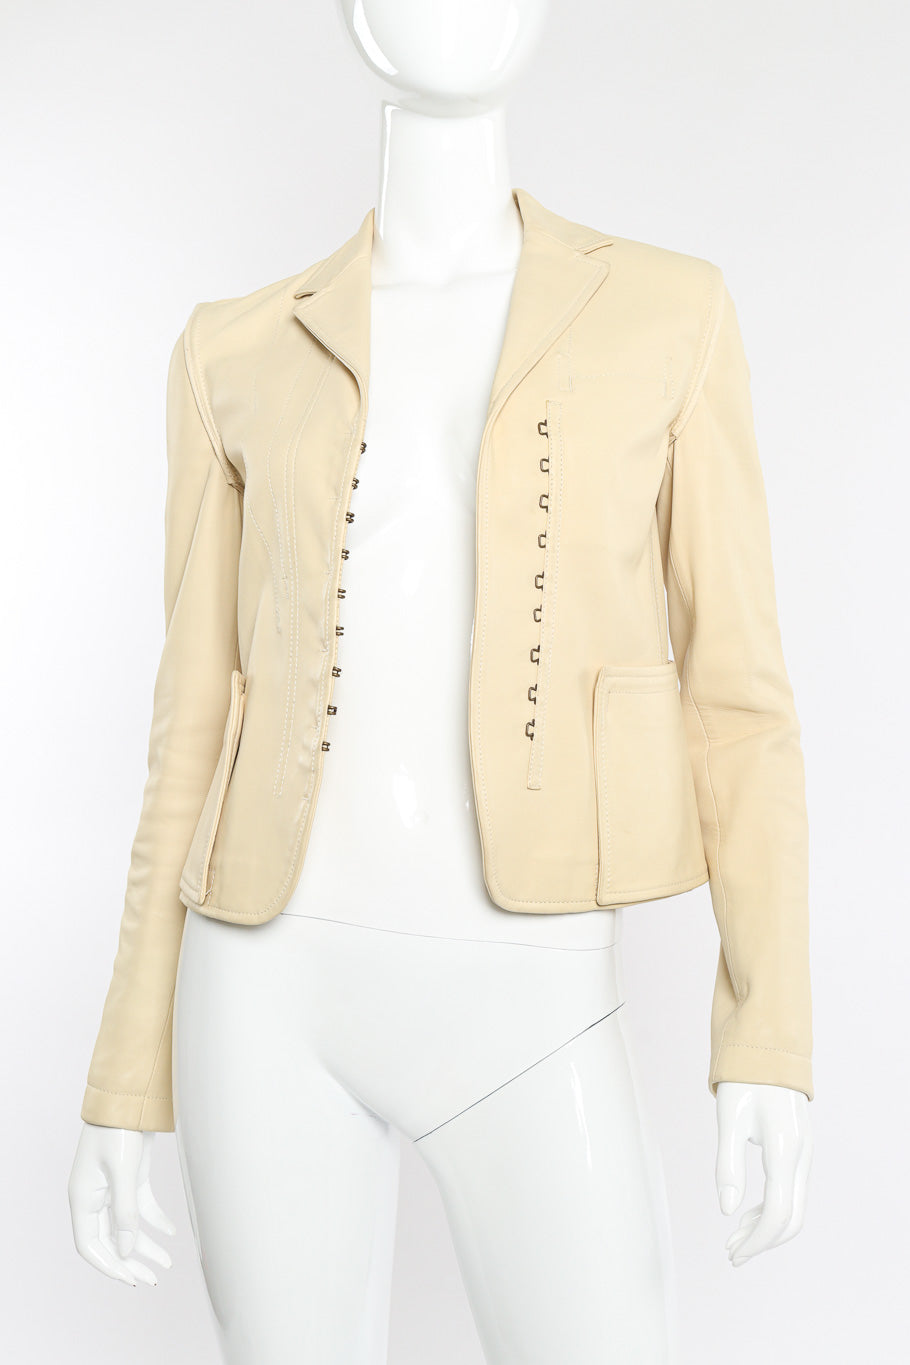 Leather jacket by Gucci on mannequin front close @recessla